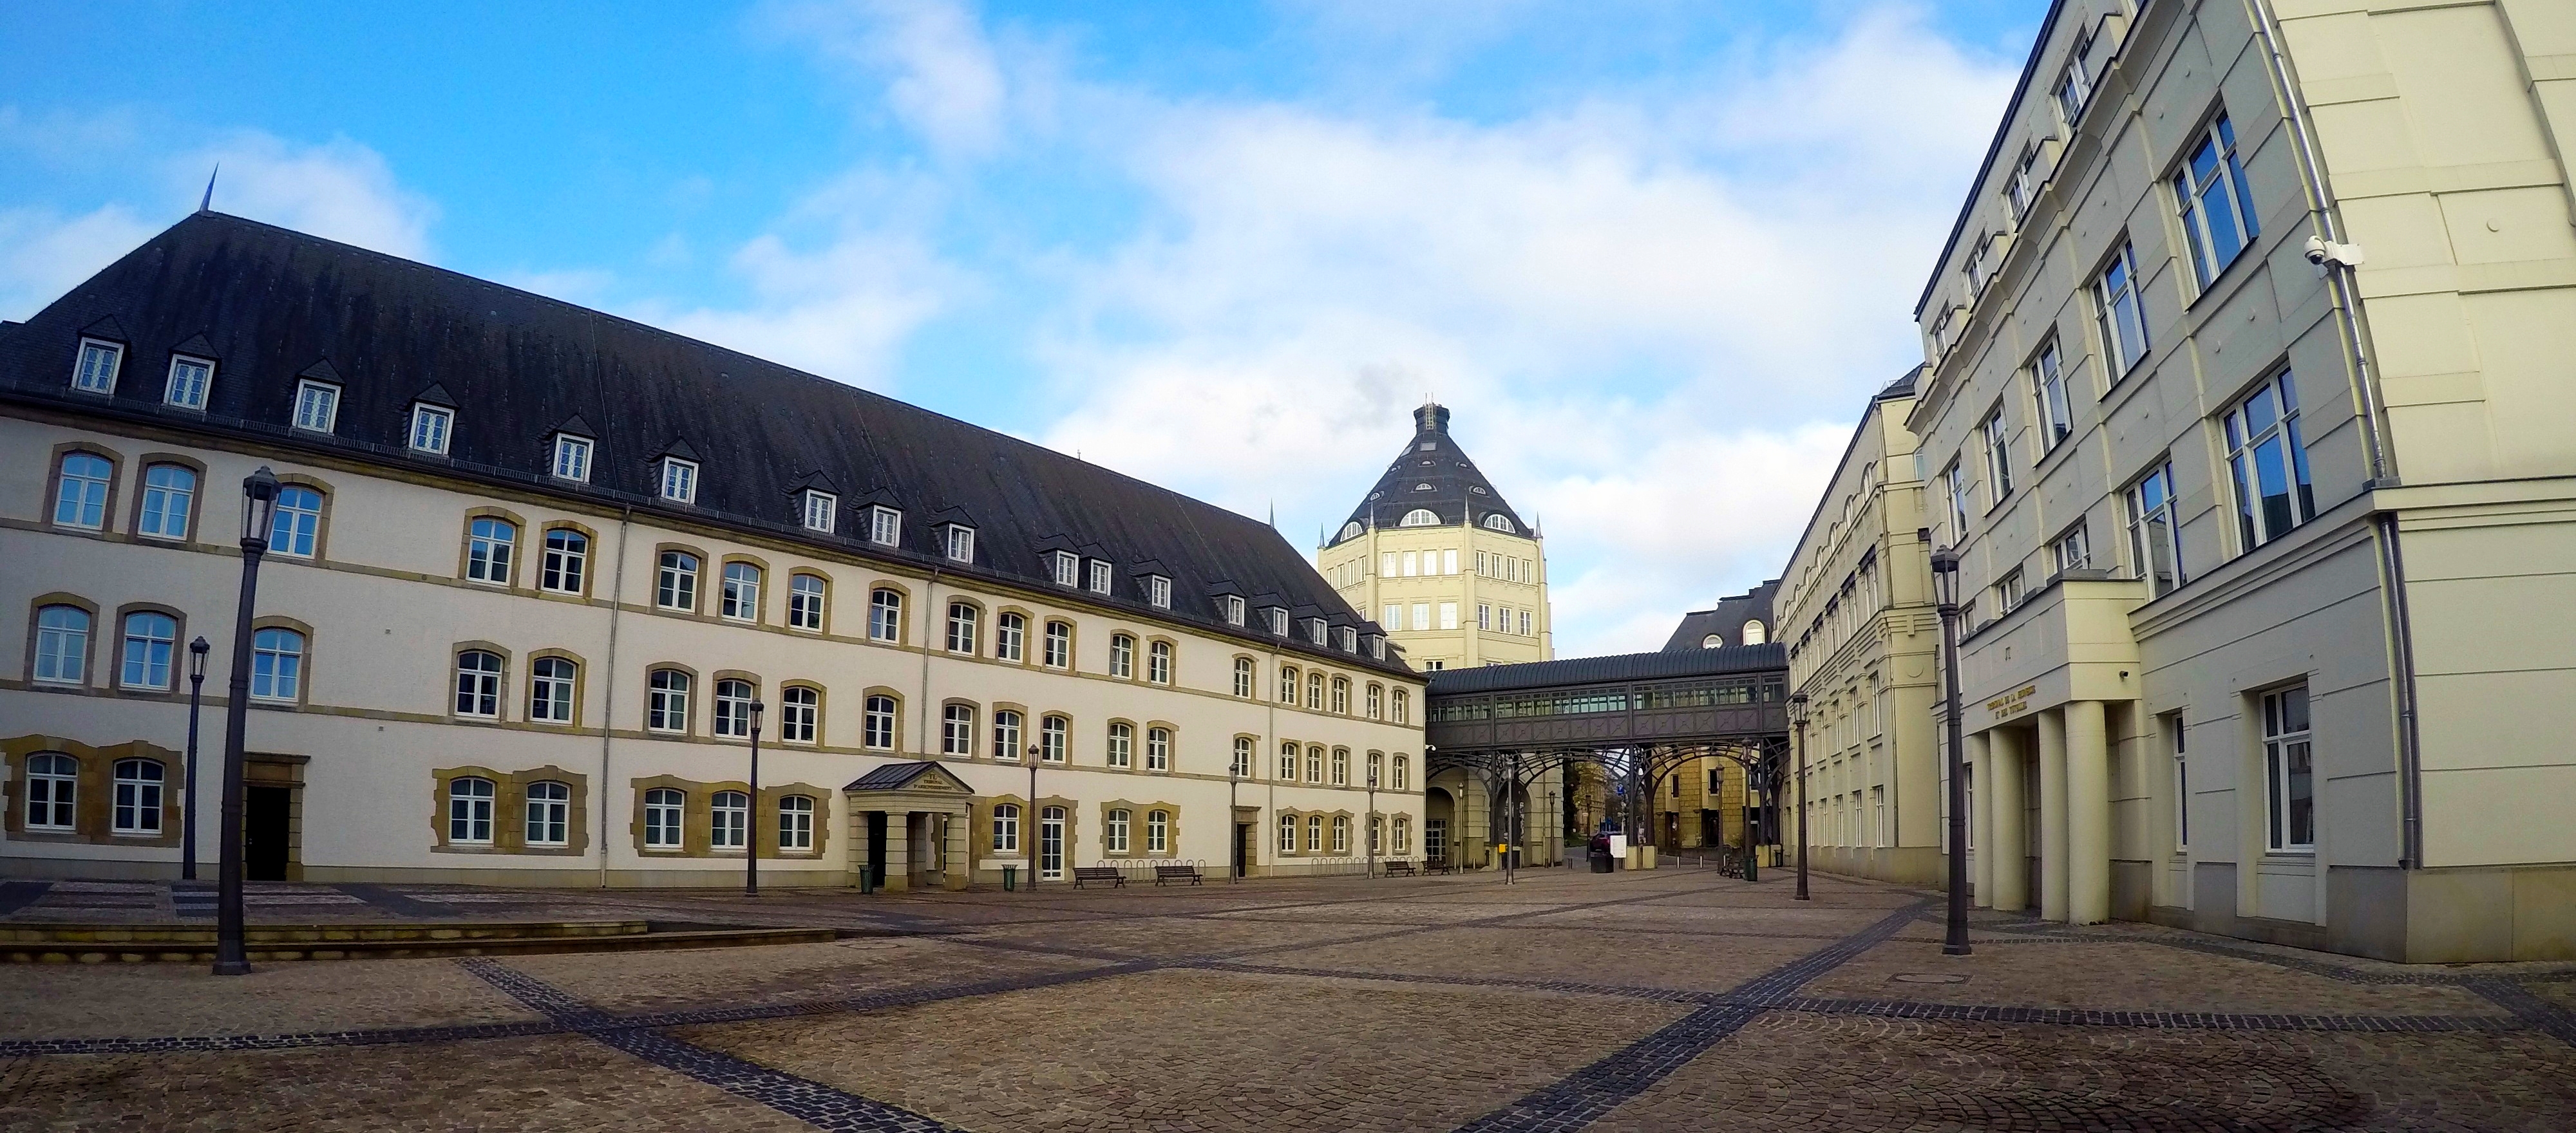 3 Best Places to Visit in Luxembourg City – Flying Dutchman Pat